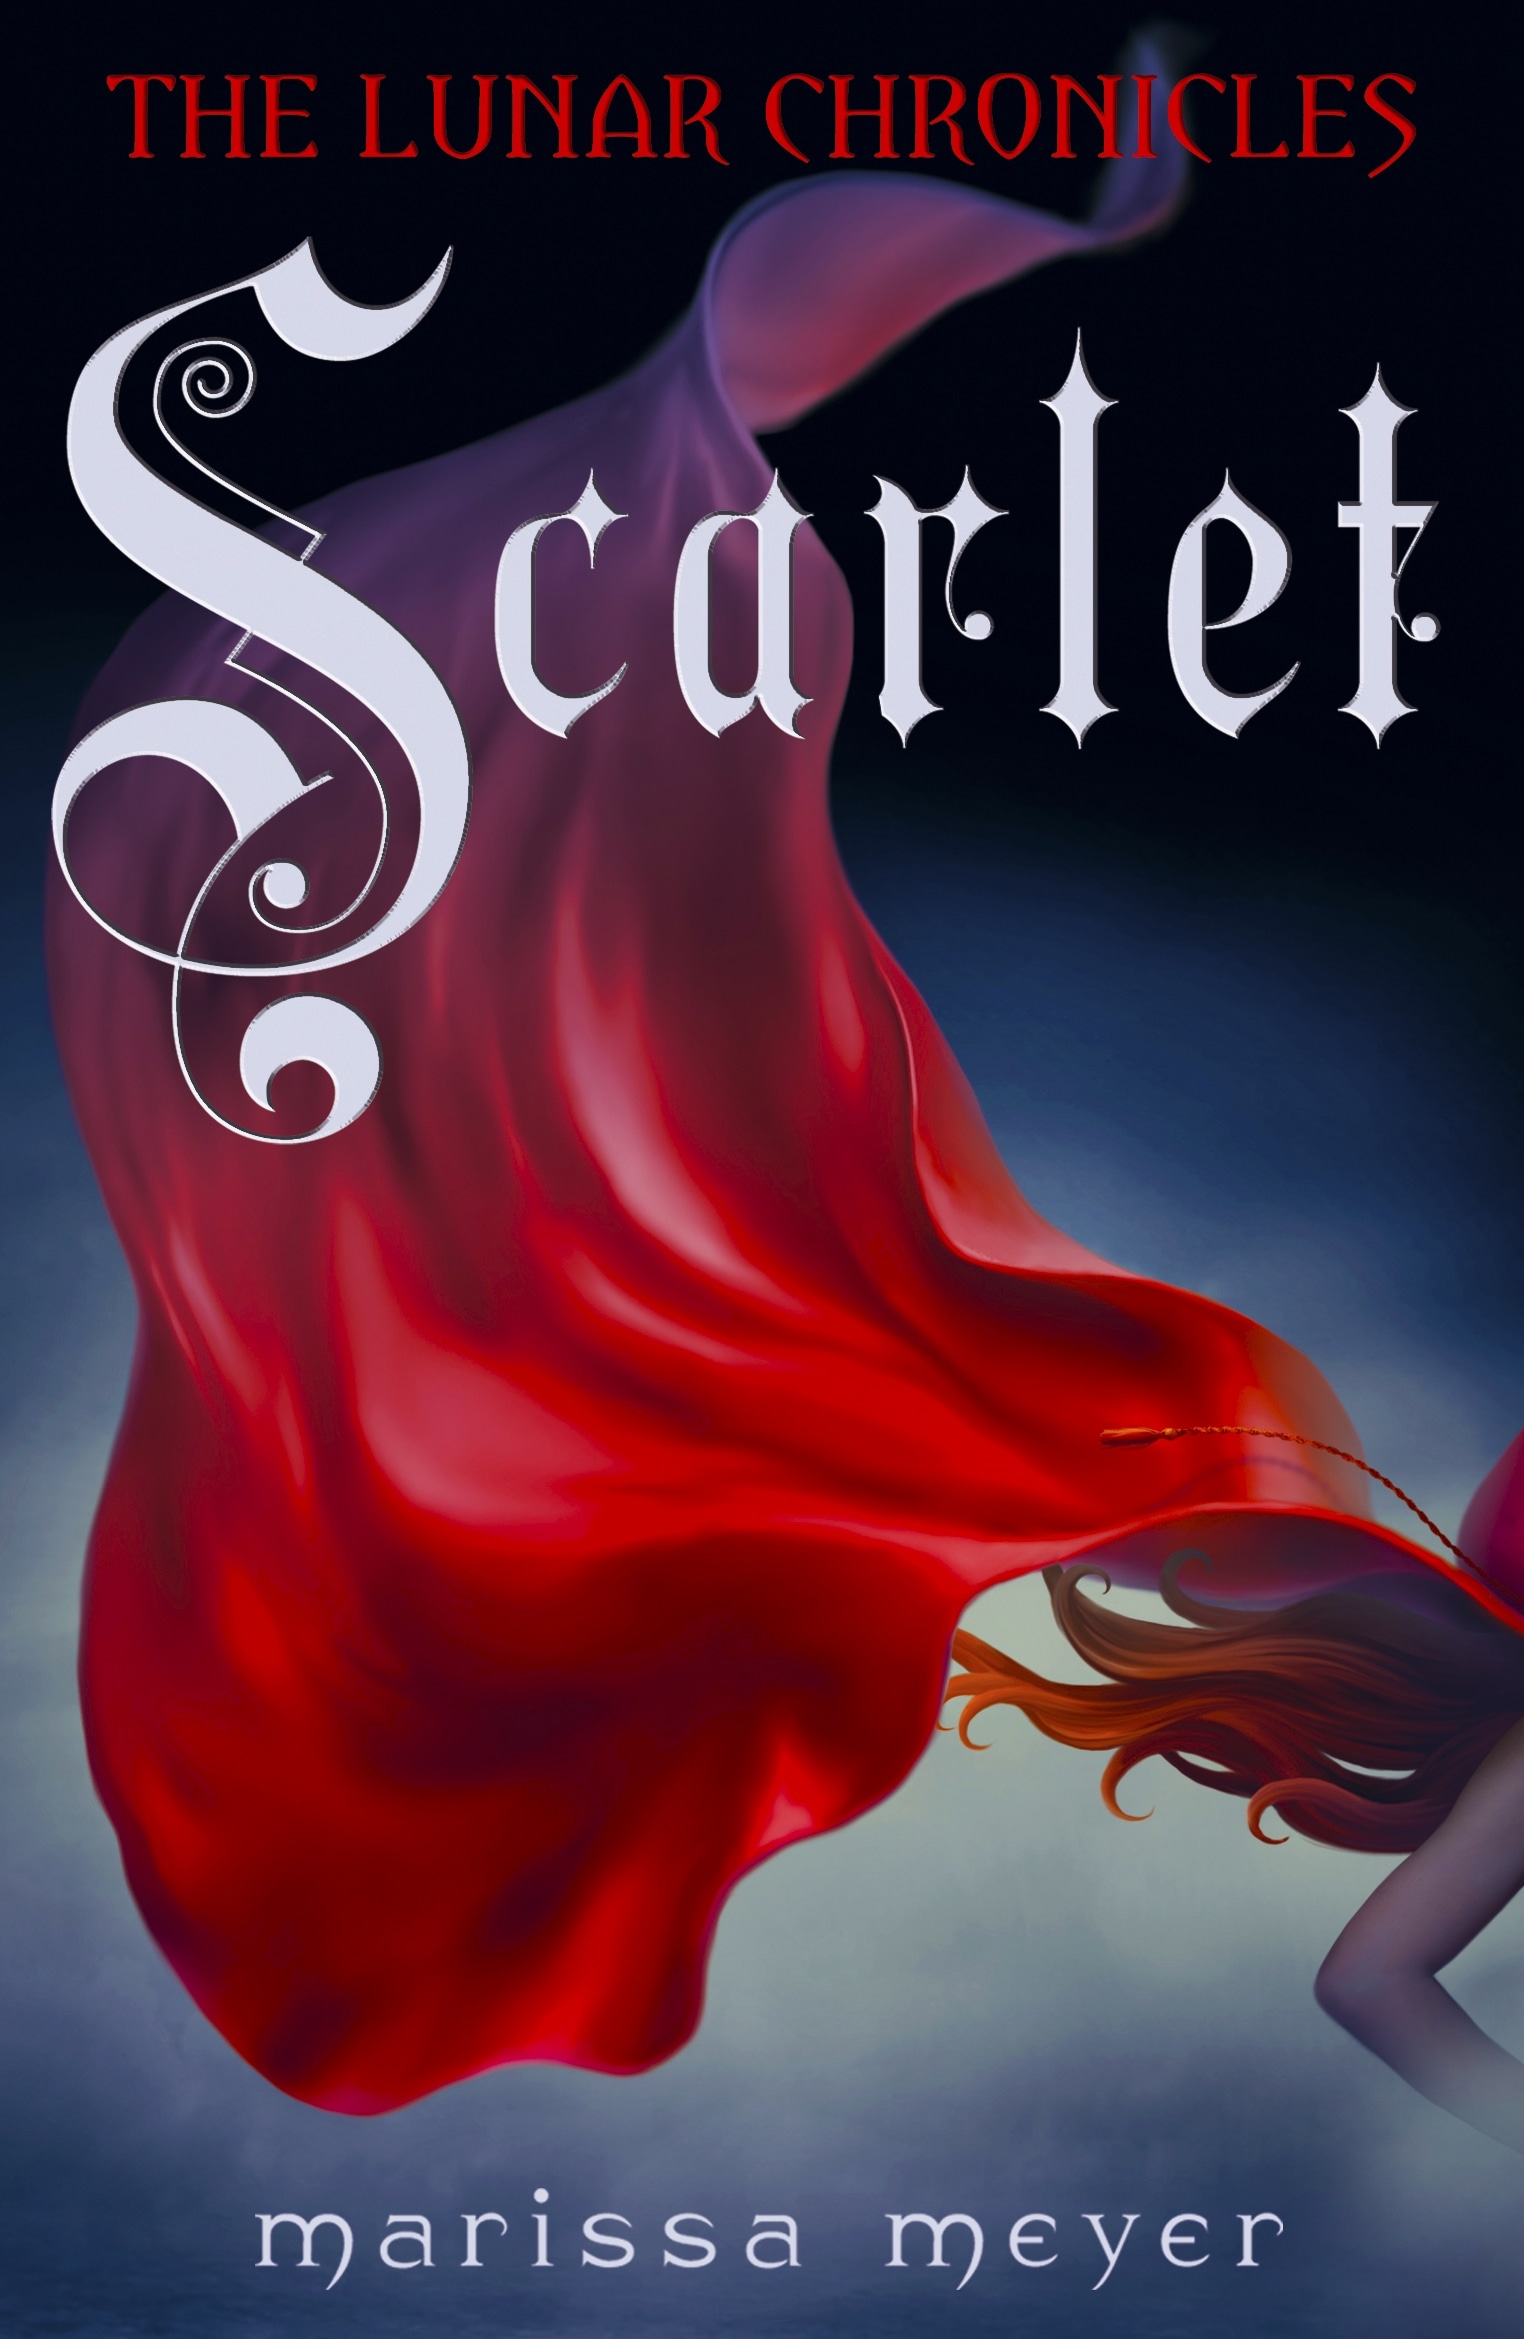 Book “Scarlet (The Lunar Chronicles Book 2)” by Marissa Meyer — February 7, 2013